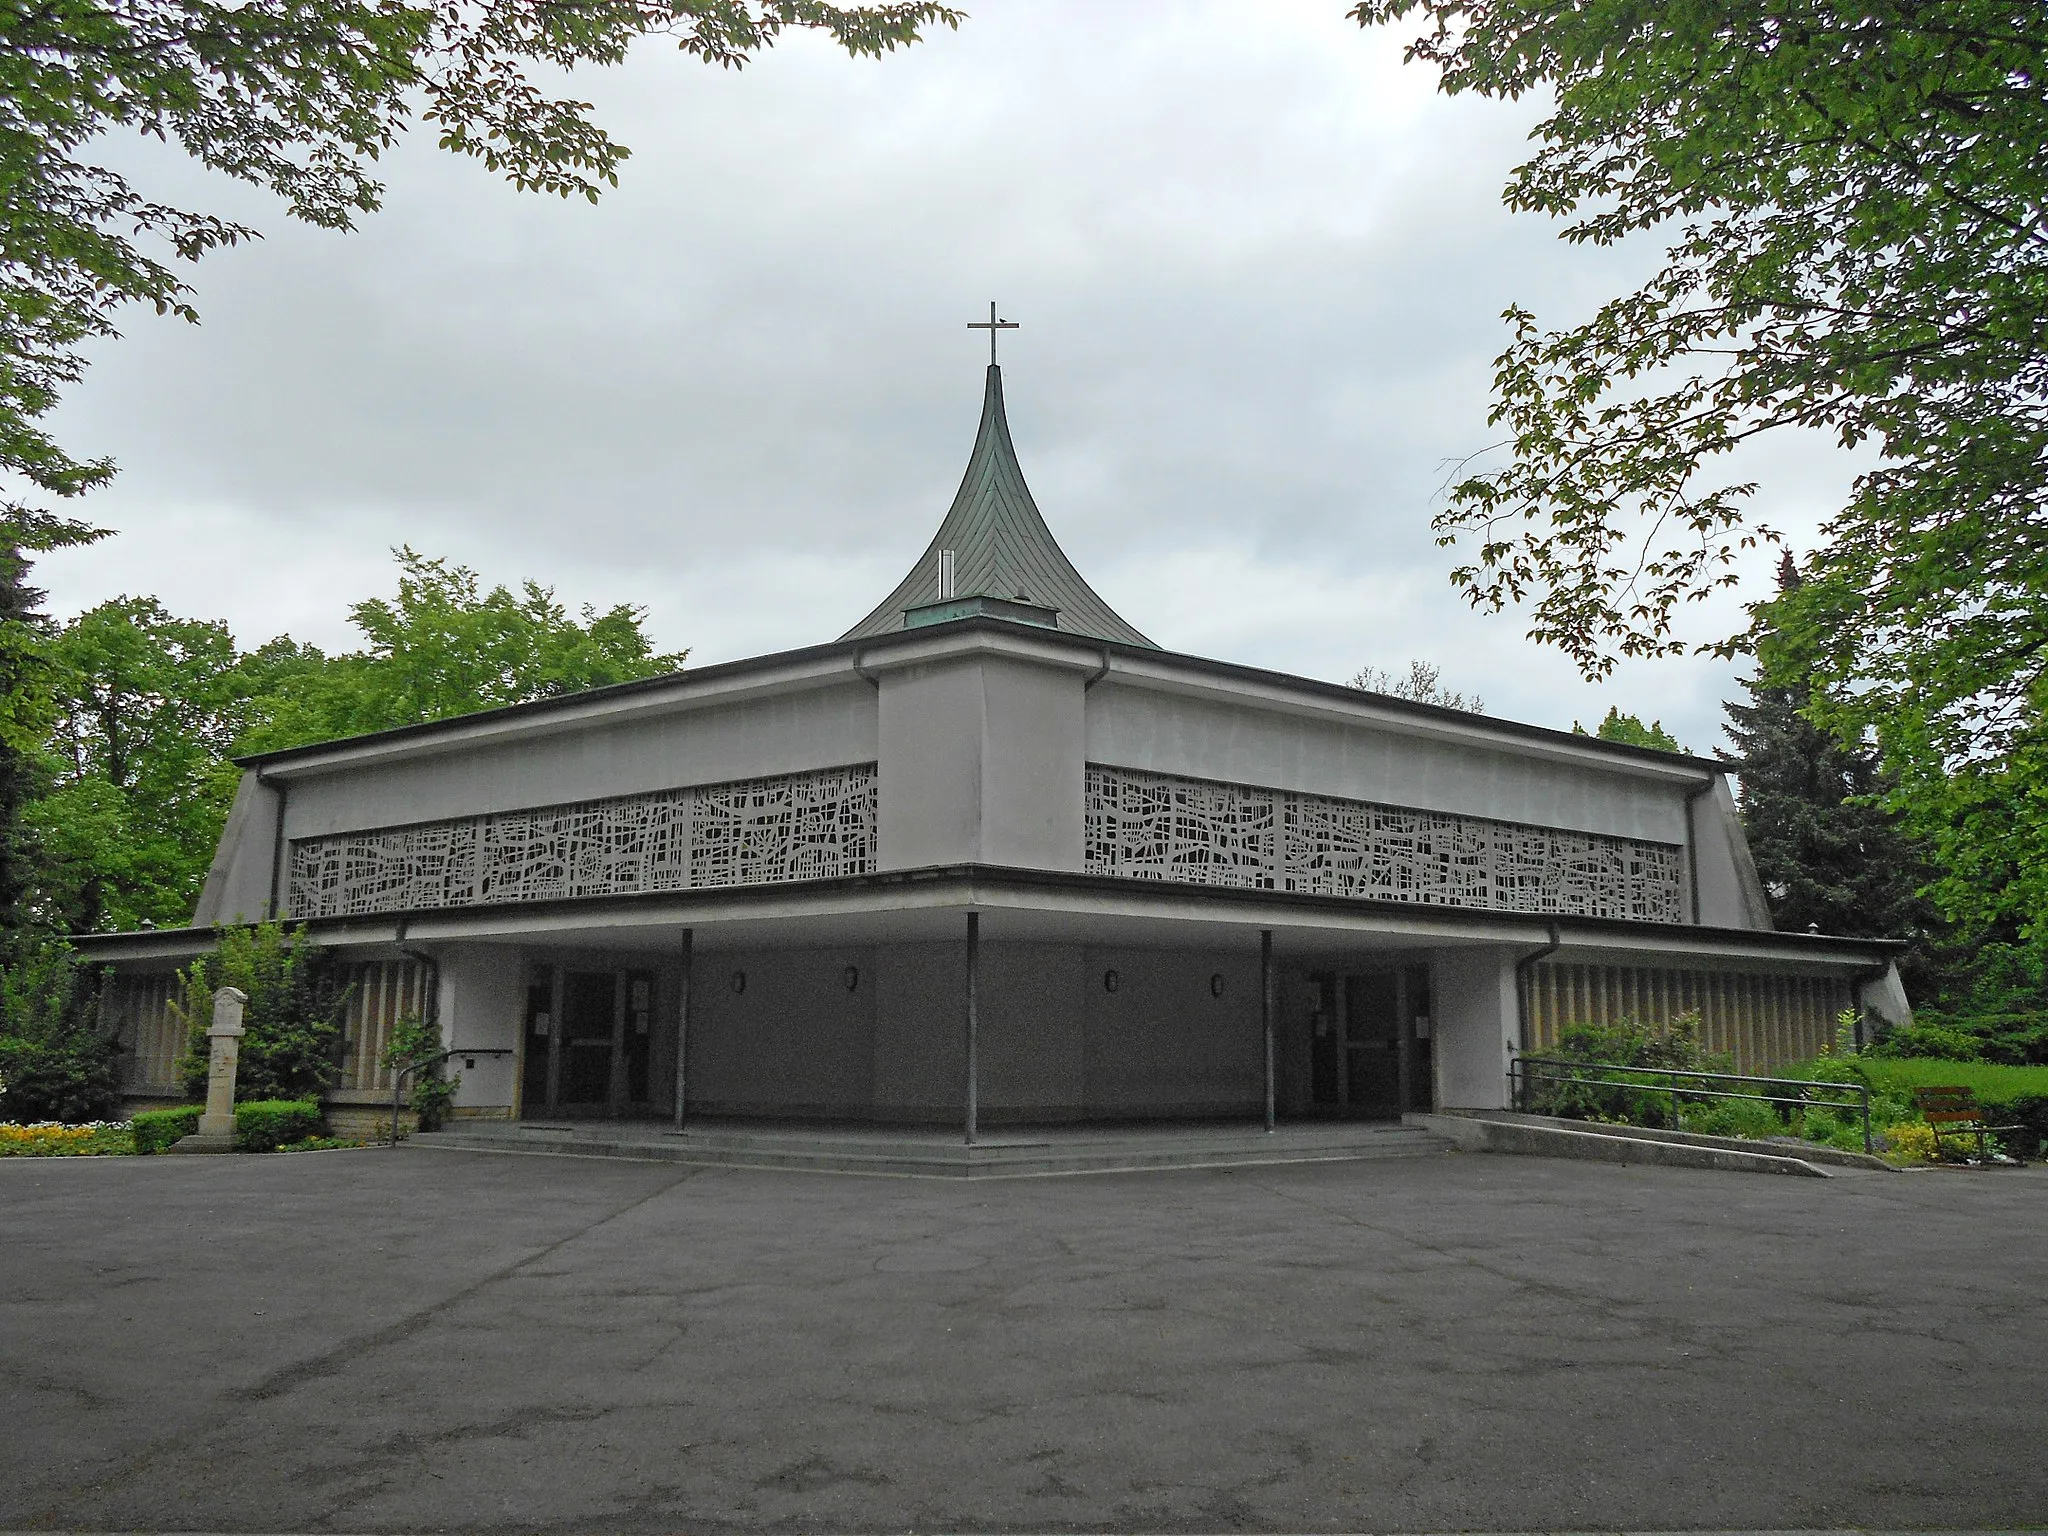 Photo showing: The Roman Catholic Church in Cessange, in the city of Luxembourg.